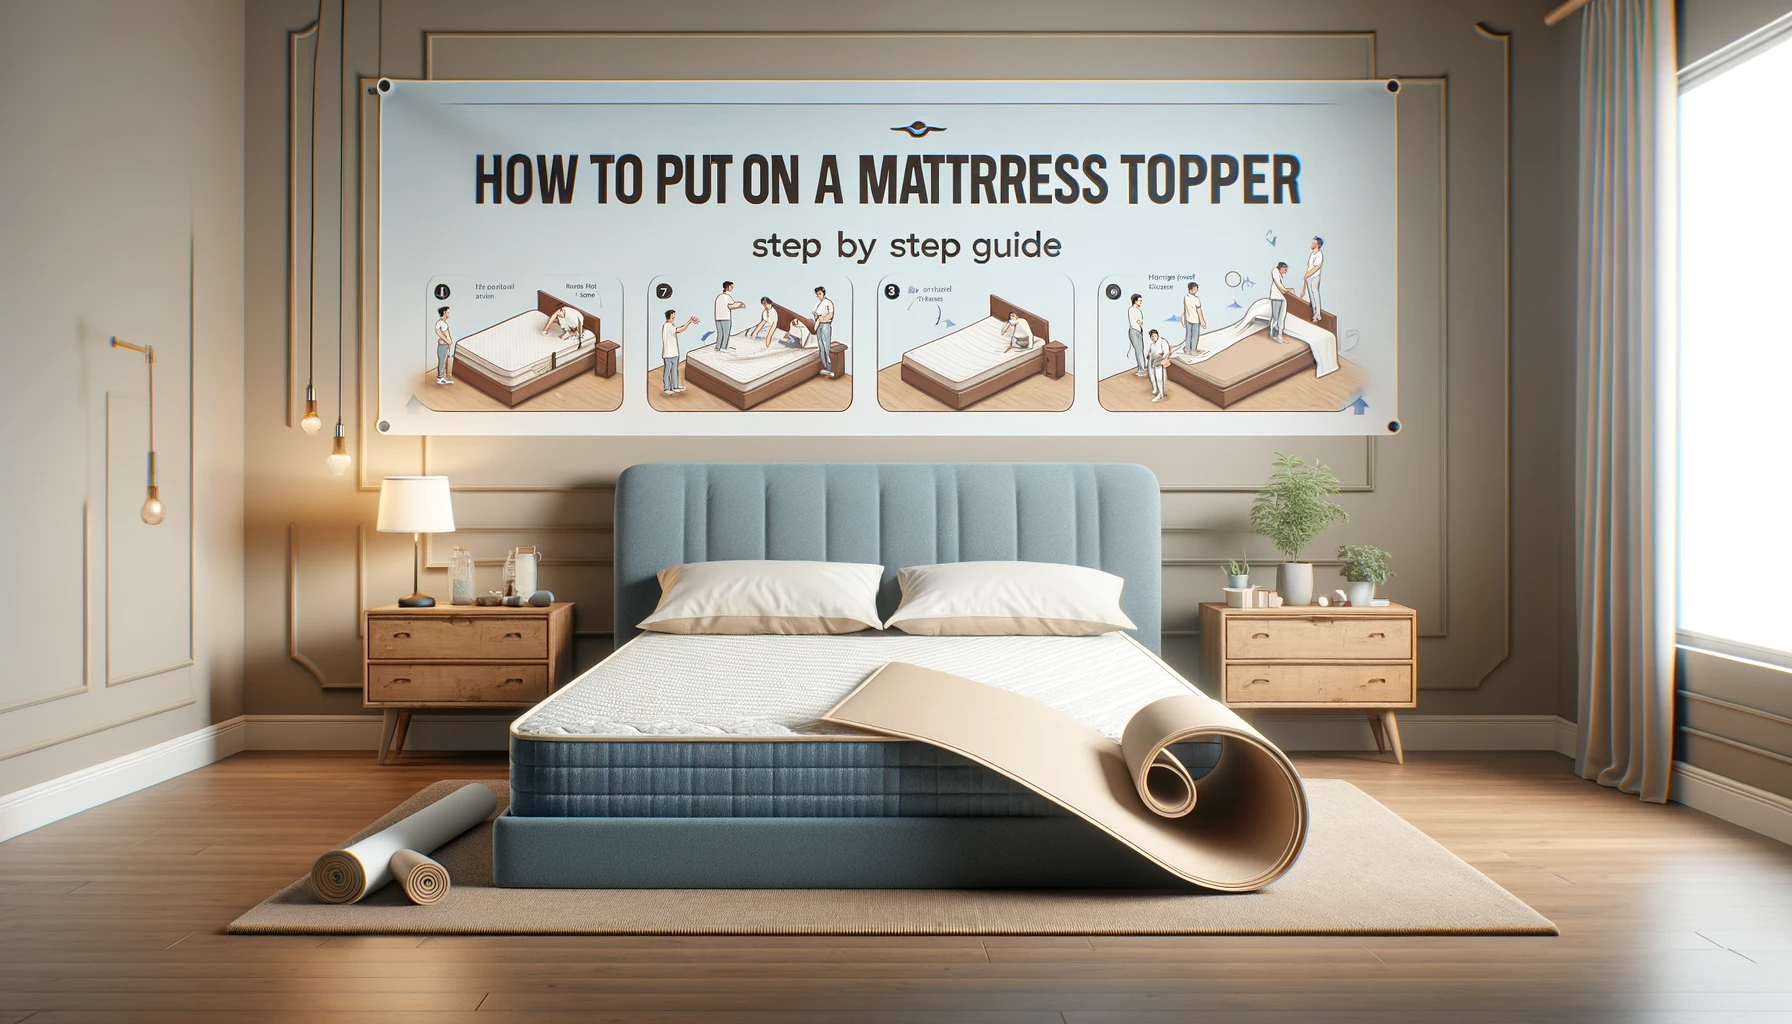 How to put on a mattress topper